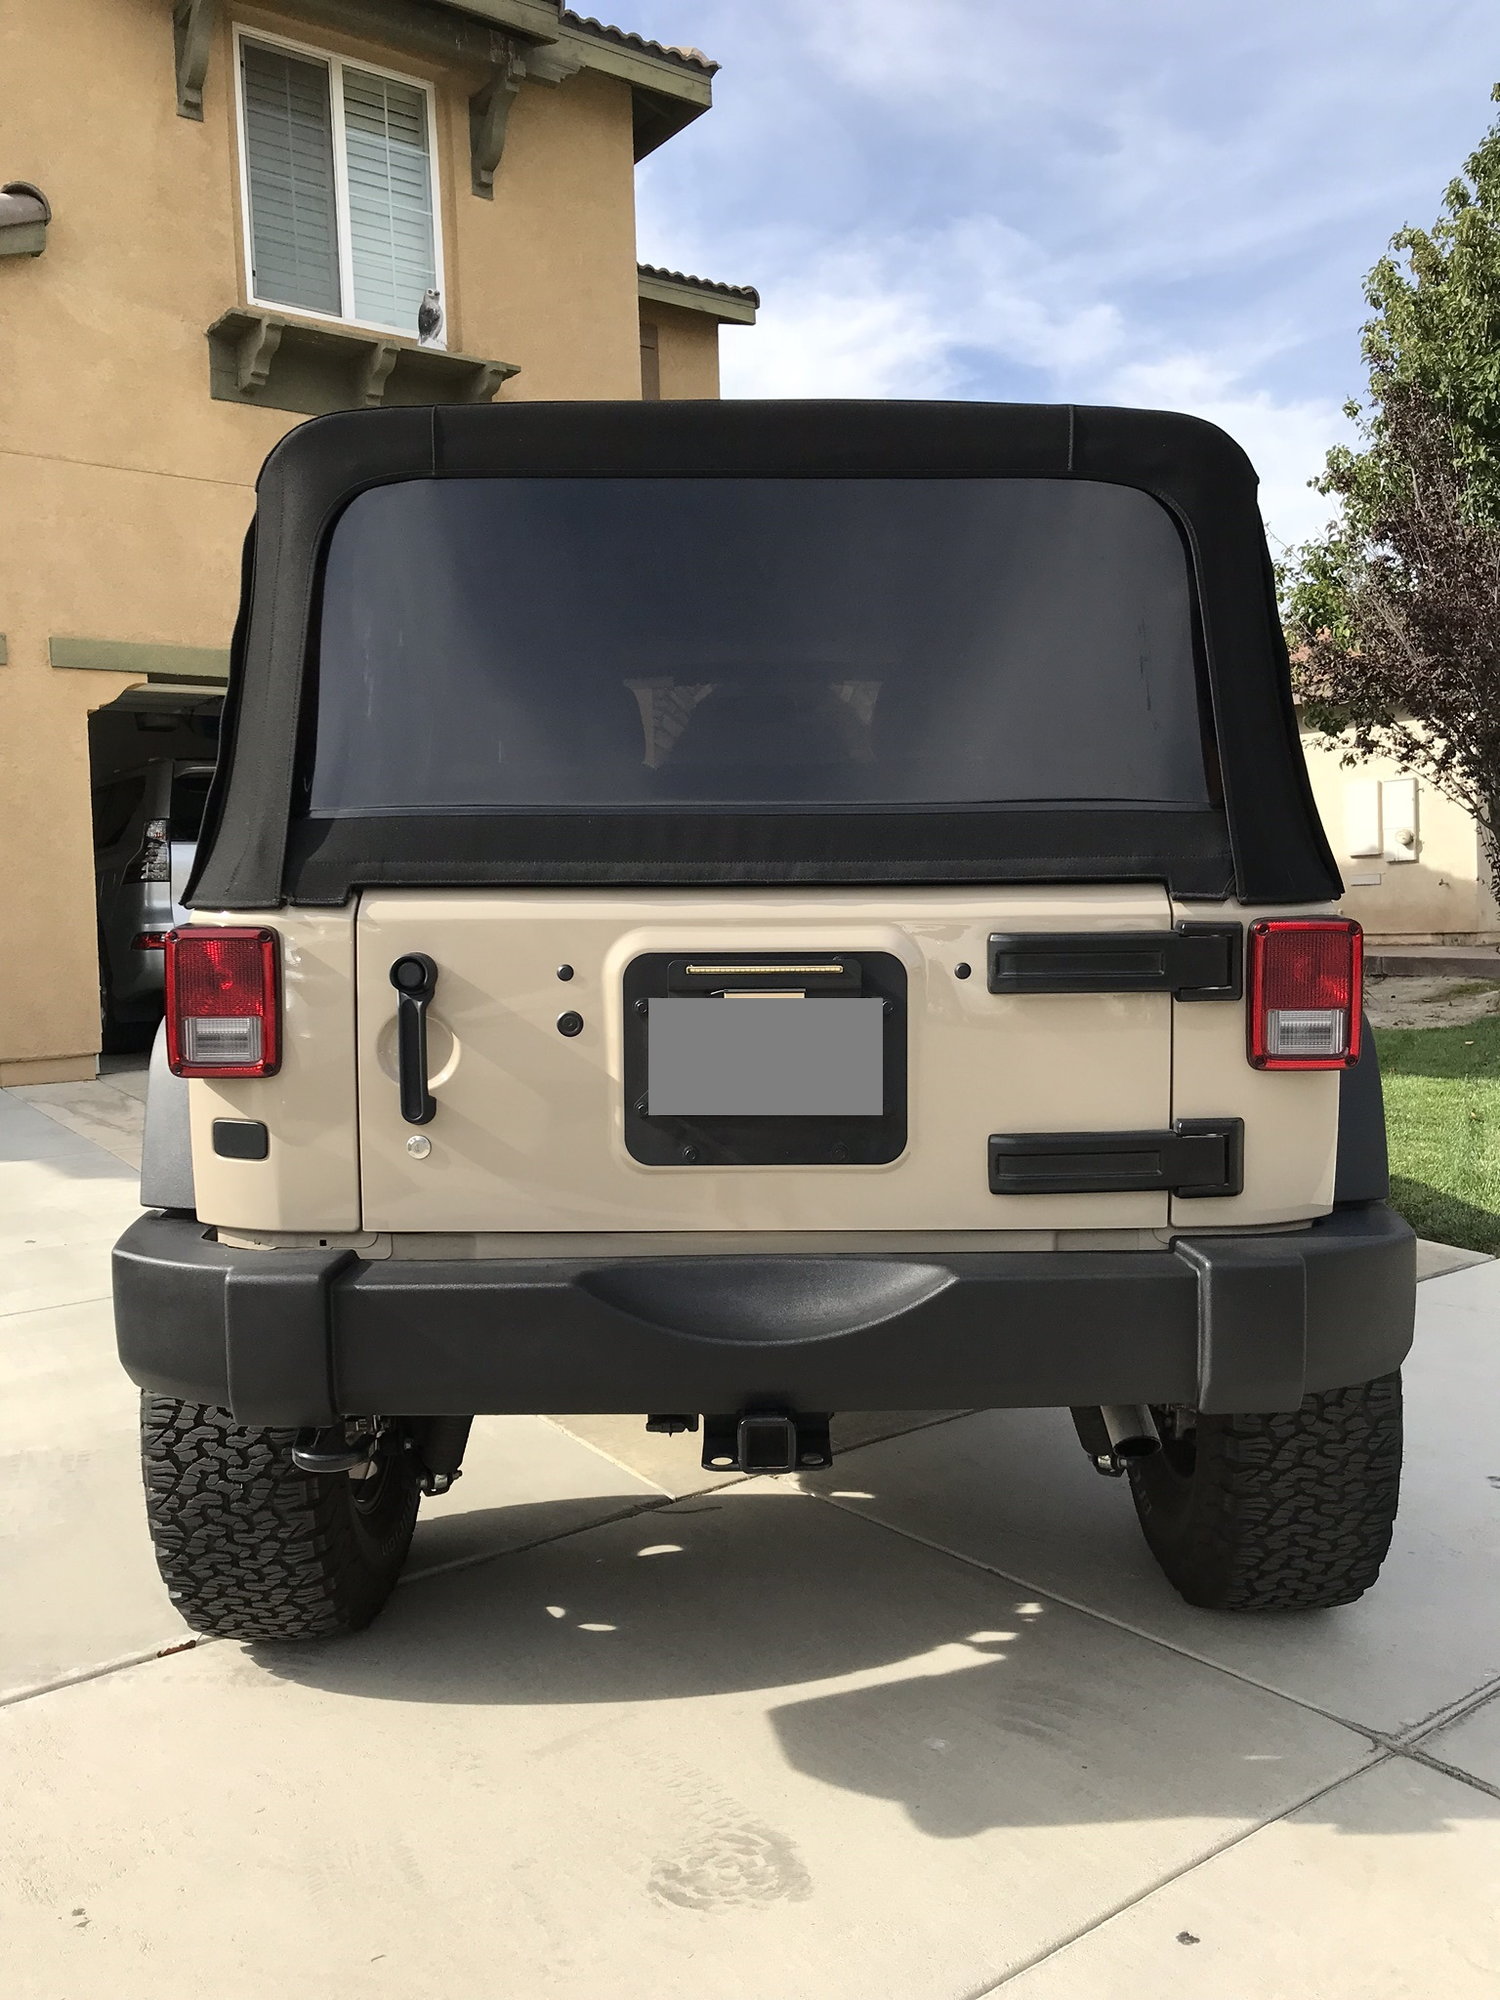 2016 Jeep Wrangler - Wrangler Unlimited Sport S Softtop - AEV Lift 35" Tires - Used - VIN 1C4BJWDG6GL274781 - 20,200 Miles - 6 cyl - 4WD - Automatic - SUV - Other - Eastvale, CA 92880, United States